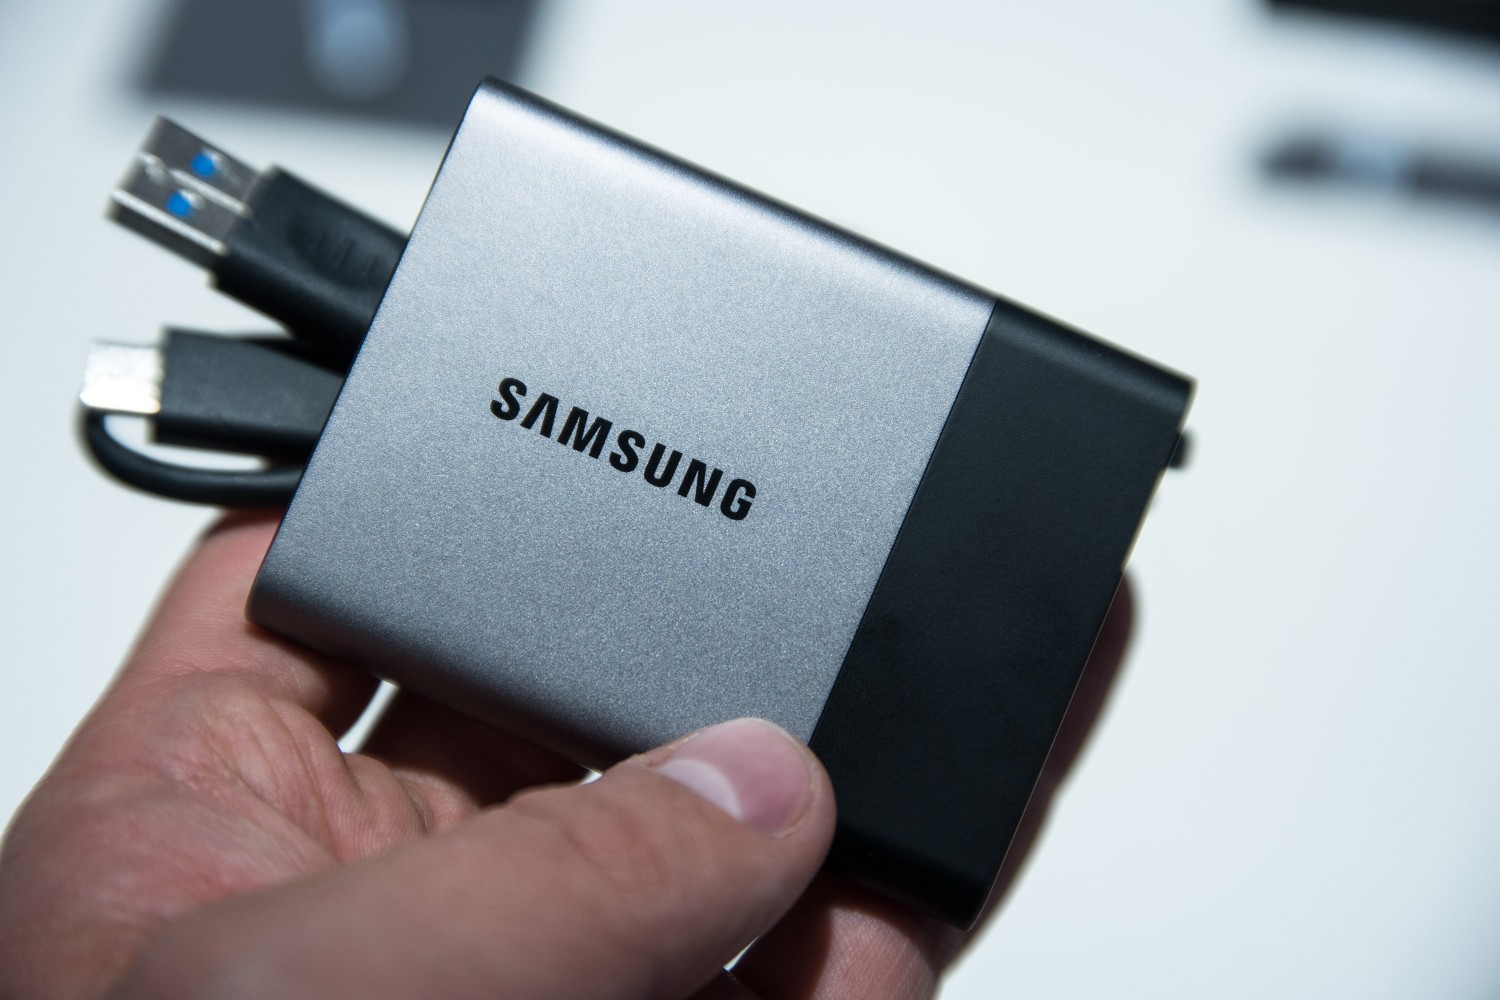 samsung portable ssd t3 encryption is it safe